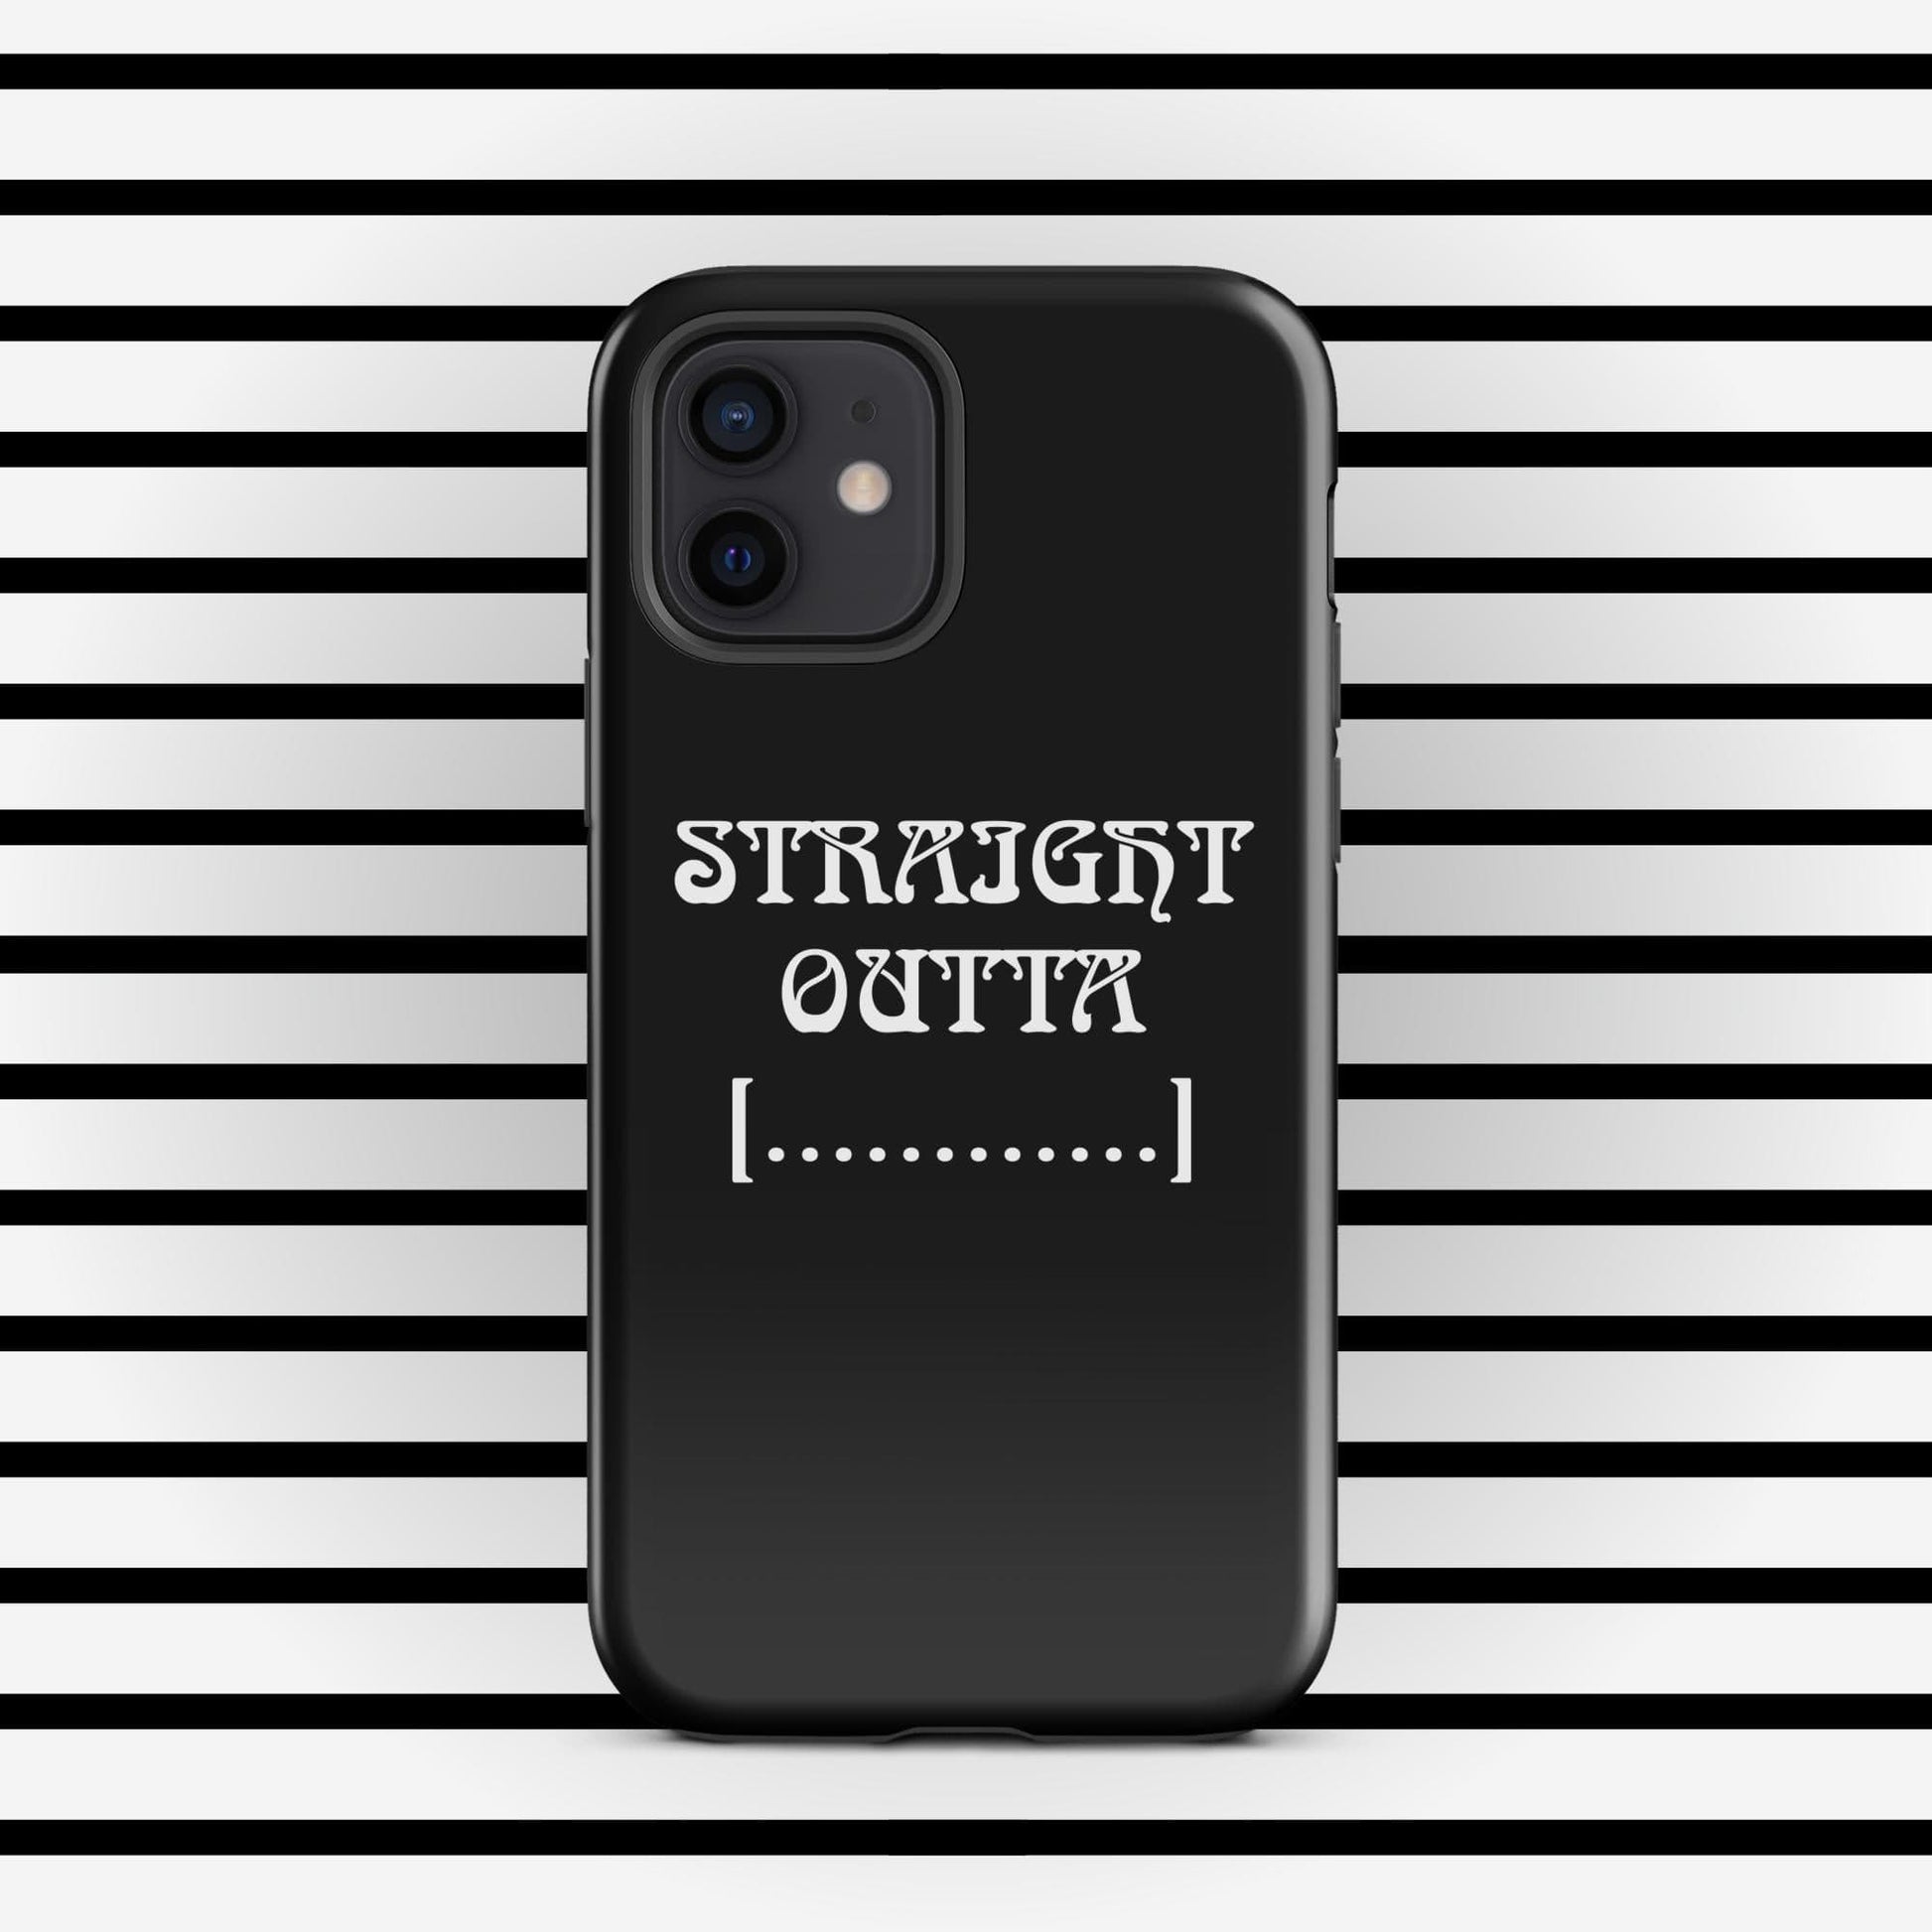 Trendyguard iPhone 12 STRAIGHT OUTTA | [Custom] Tough Case for iPhone®